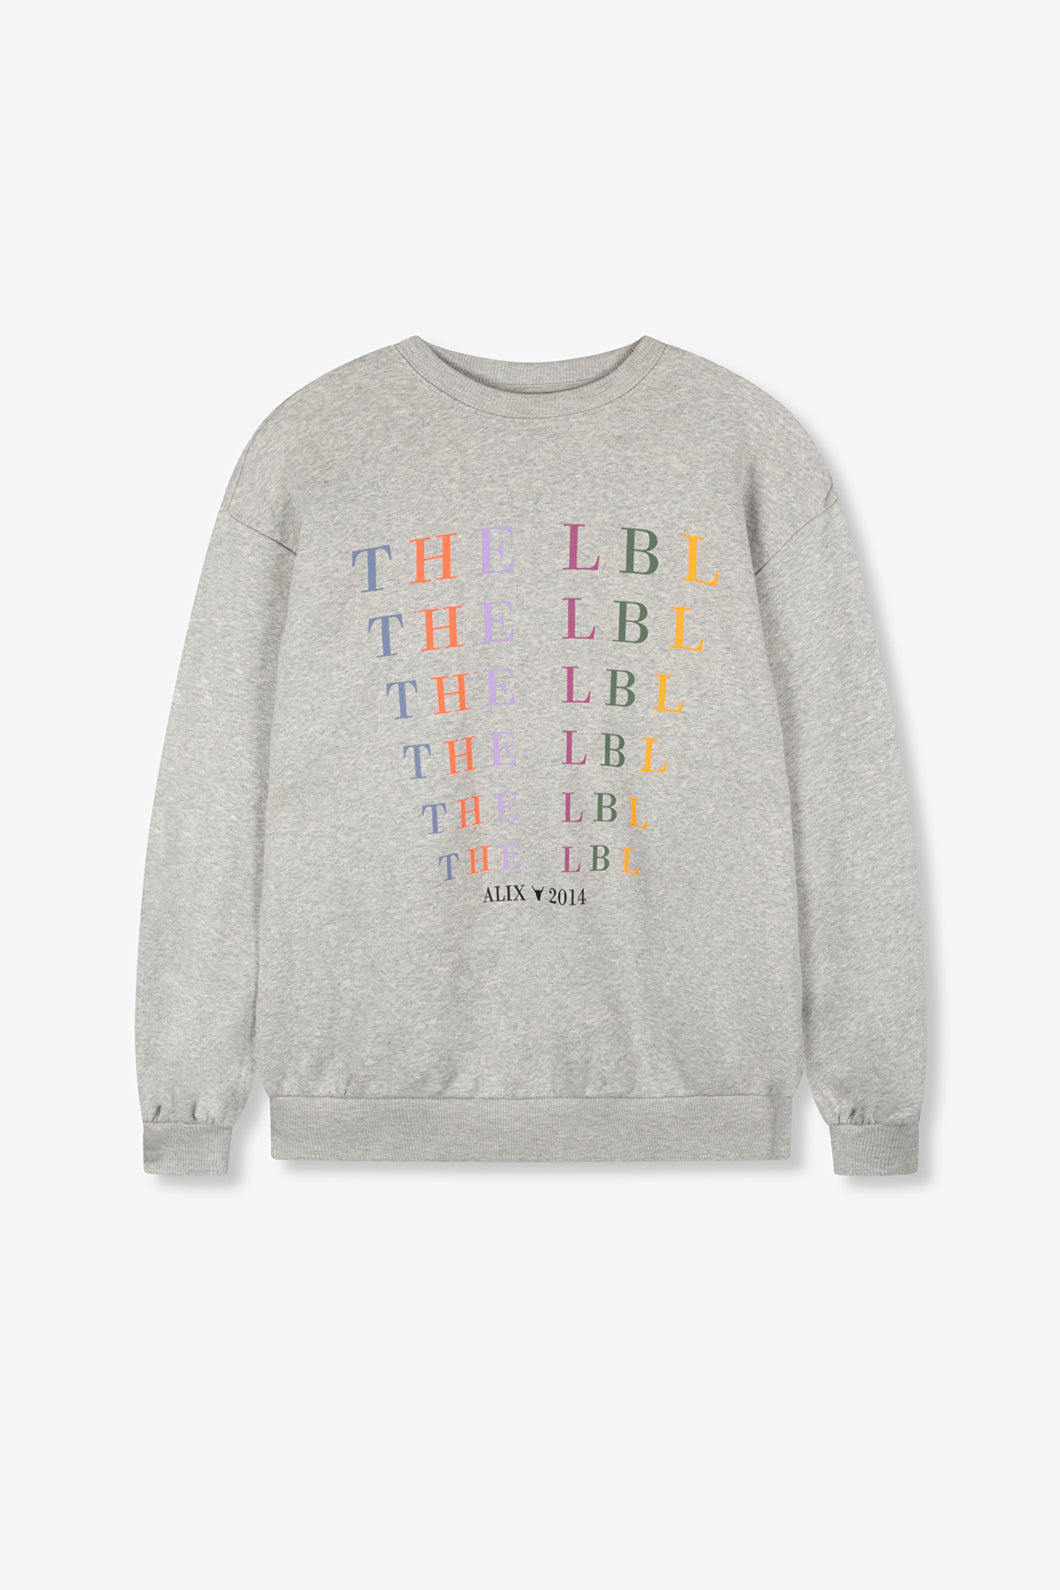 Knitted THE LBL Sweater Grey